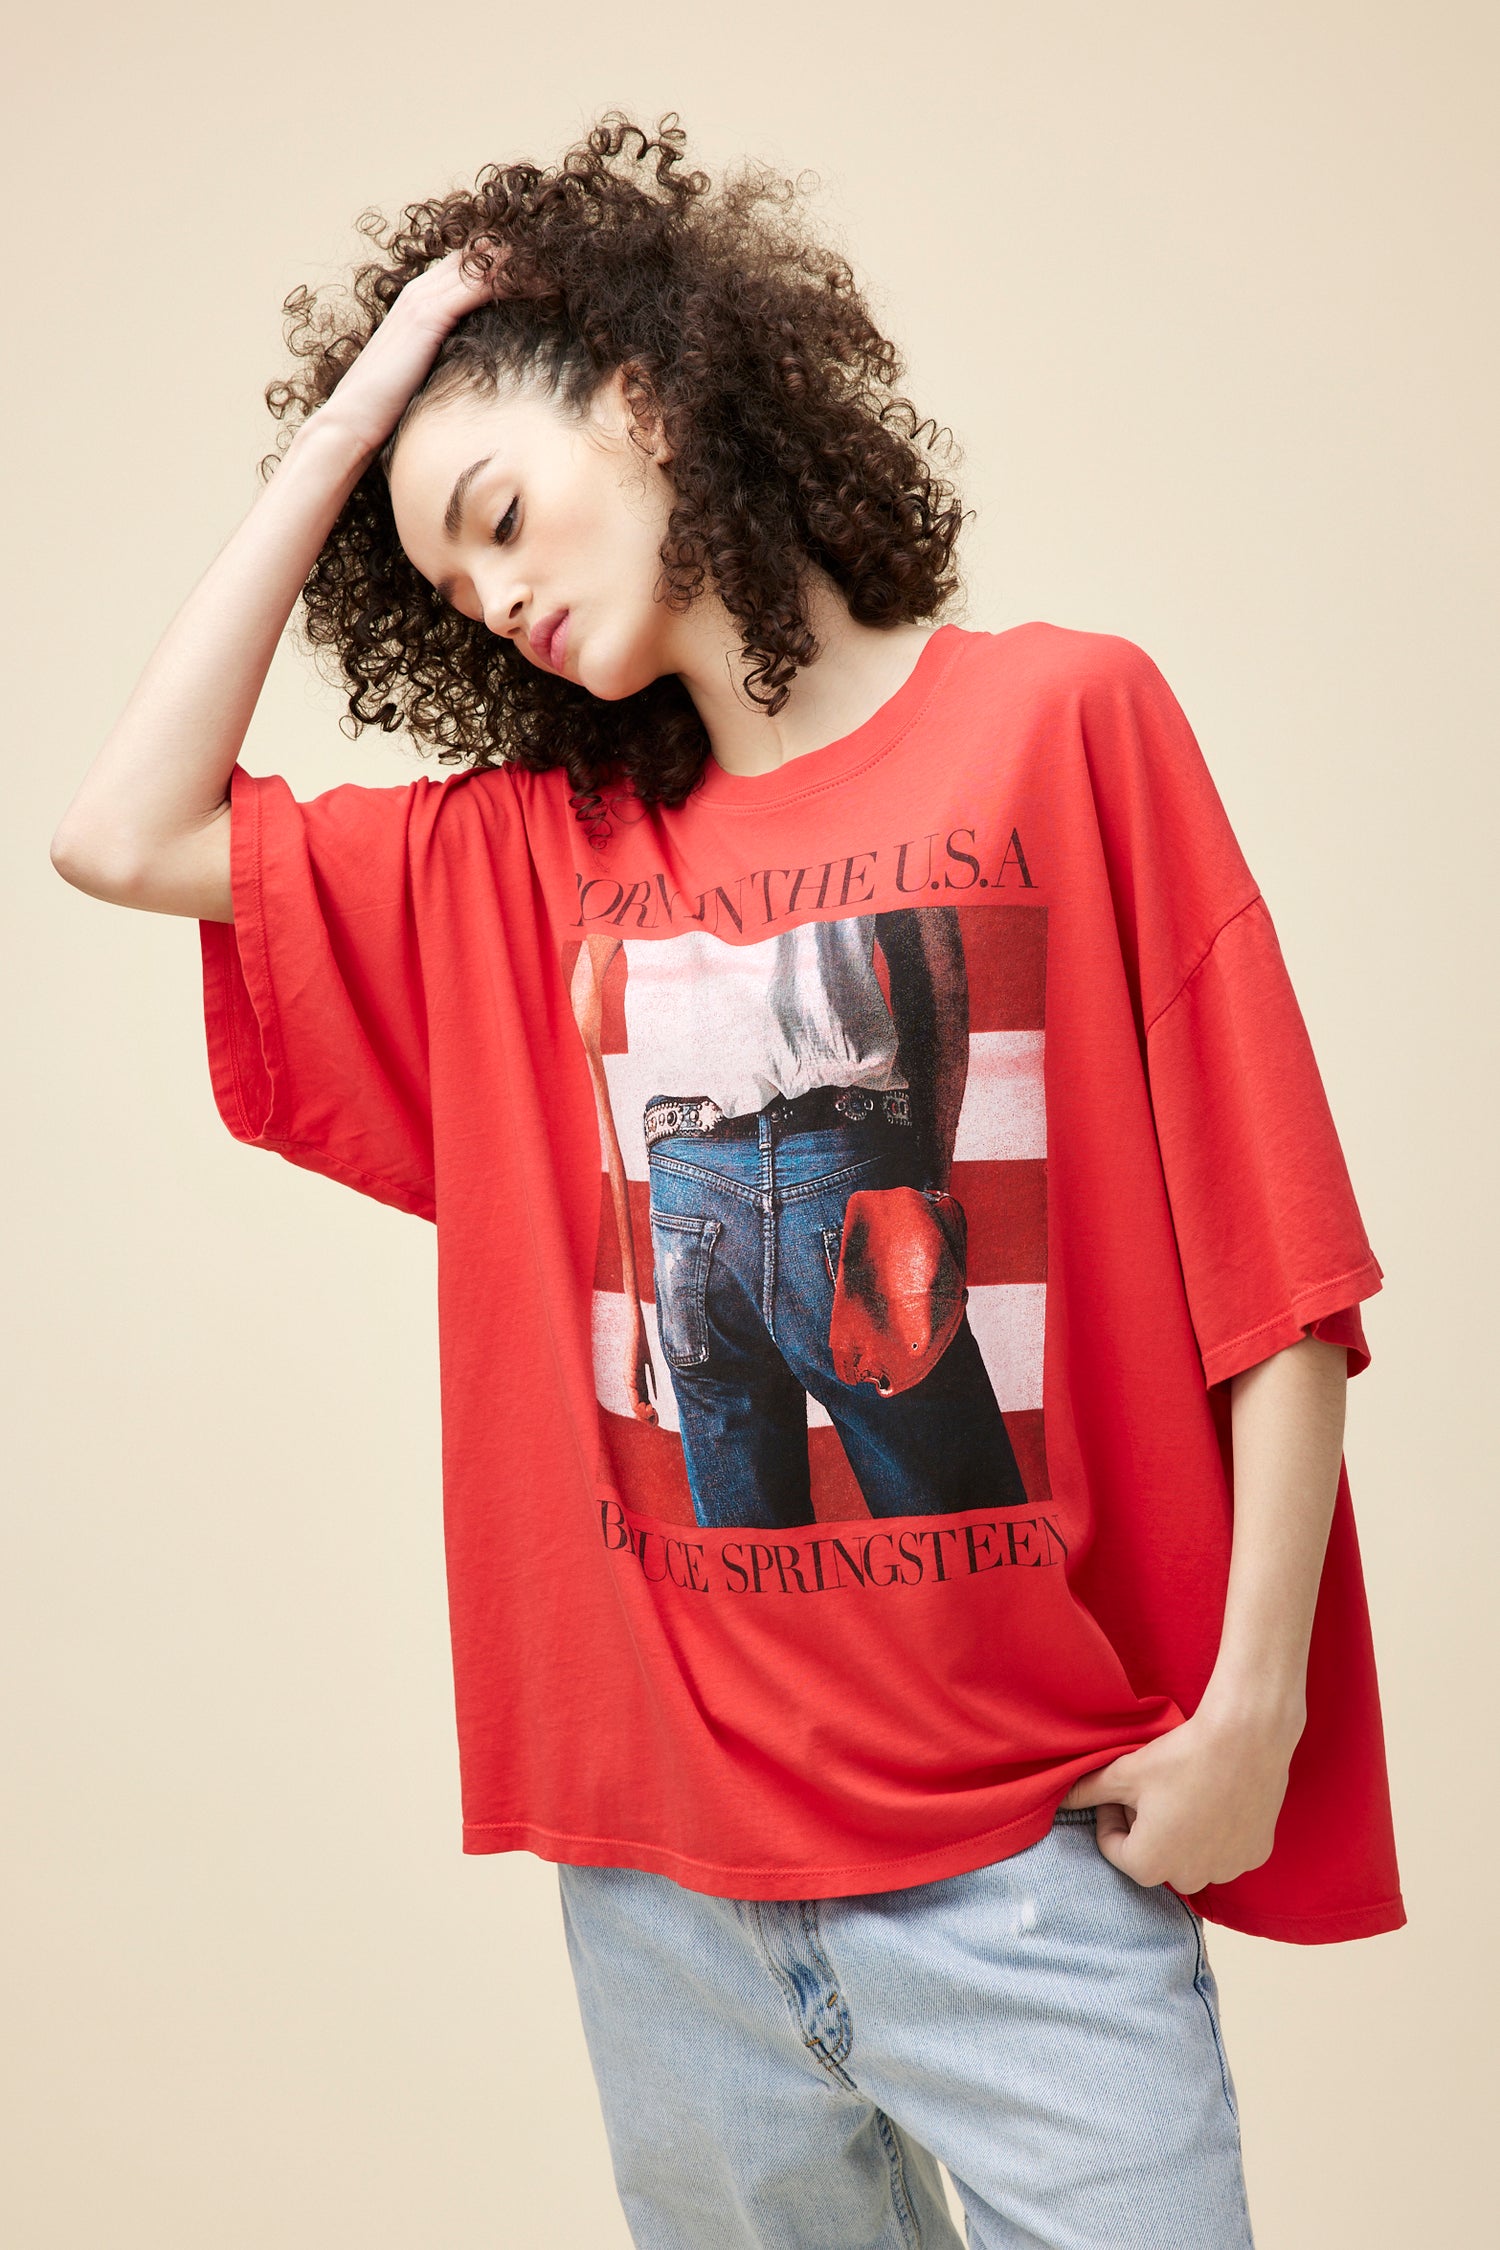 A  model featuring a red one-size shirt designed with the graphics inspired by Bruce Springsteen's "Born in the USA" album art.